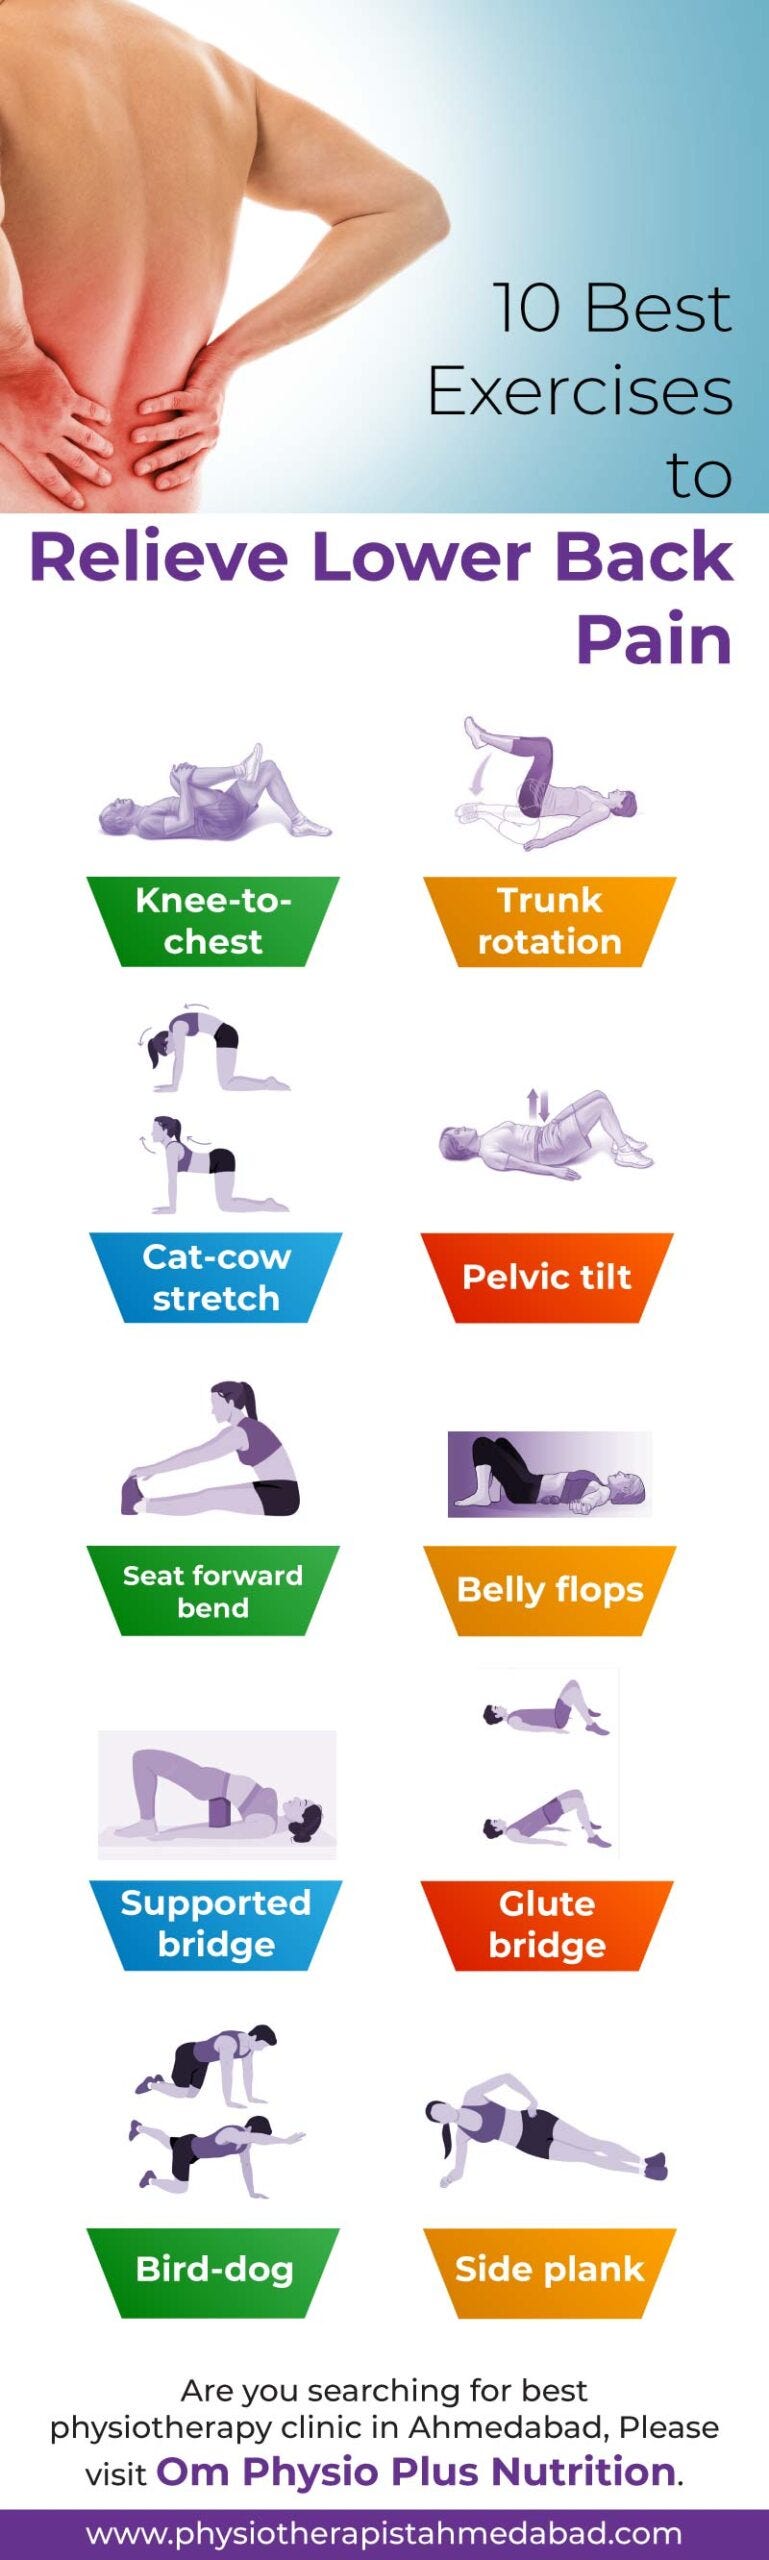 6 Exercises to Relieve Lower Back Pain